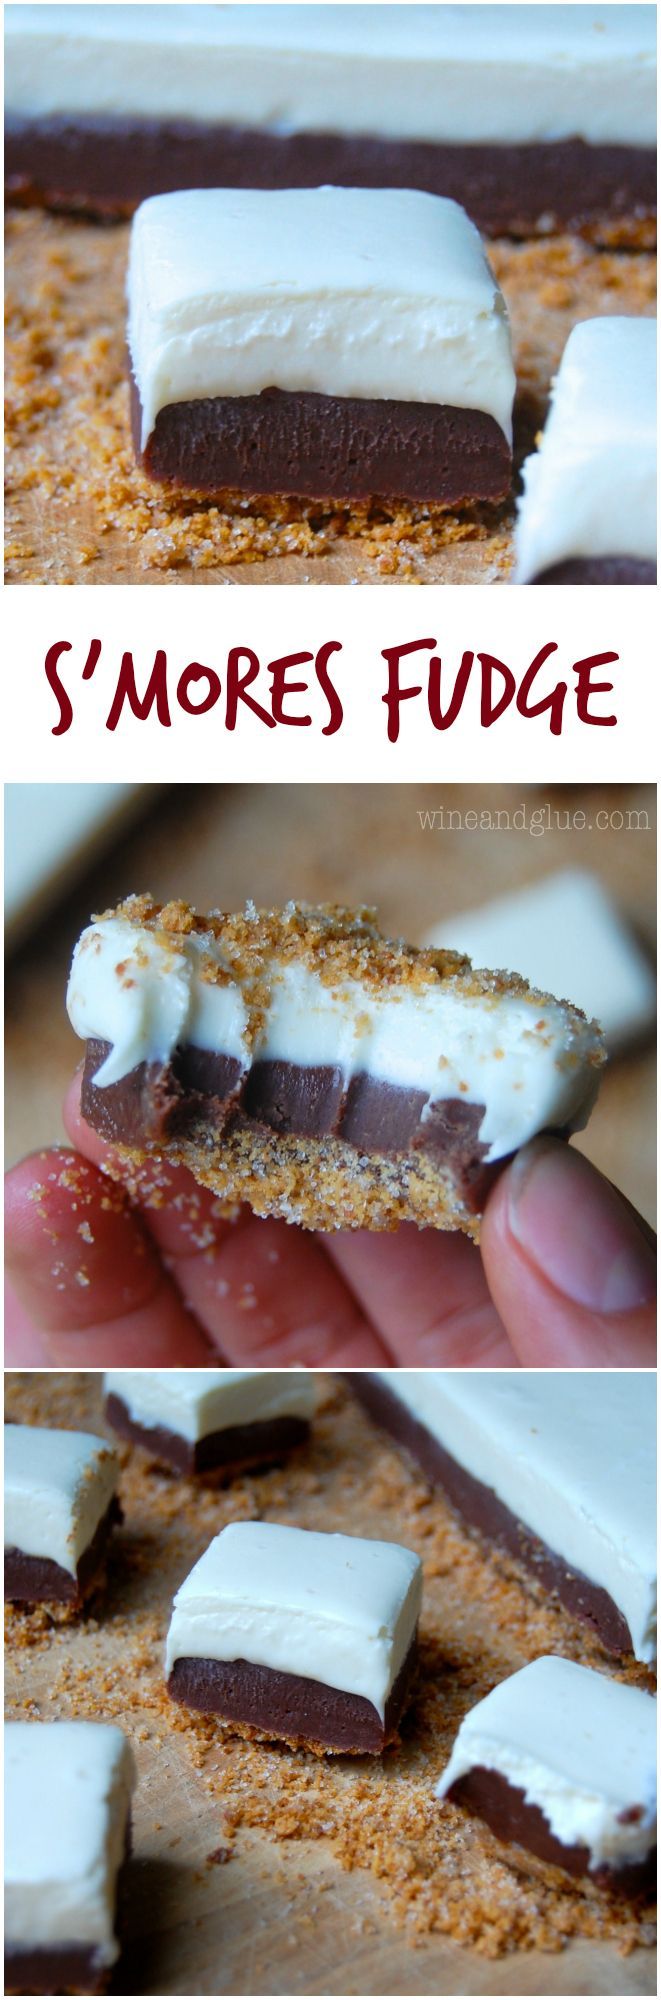 Smores Fudge with a graham cracker crust and delicious marshmallow fudge topp